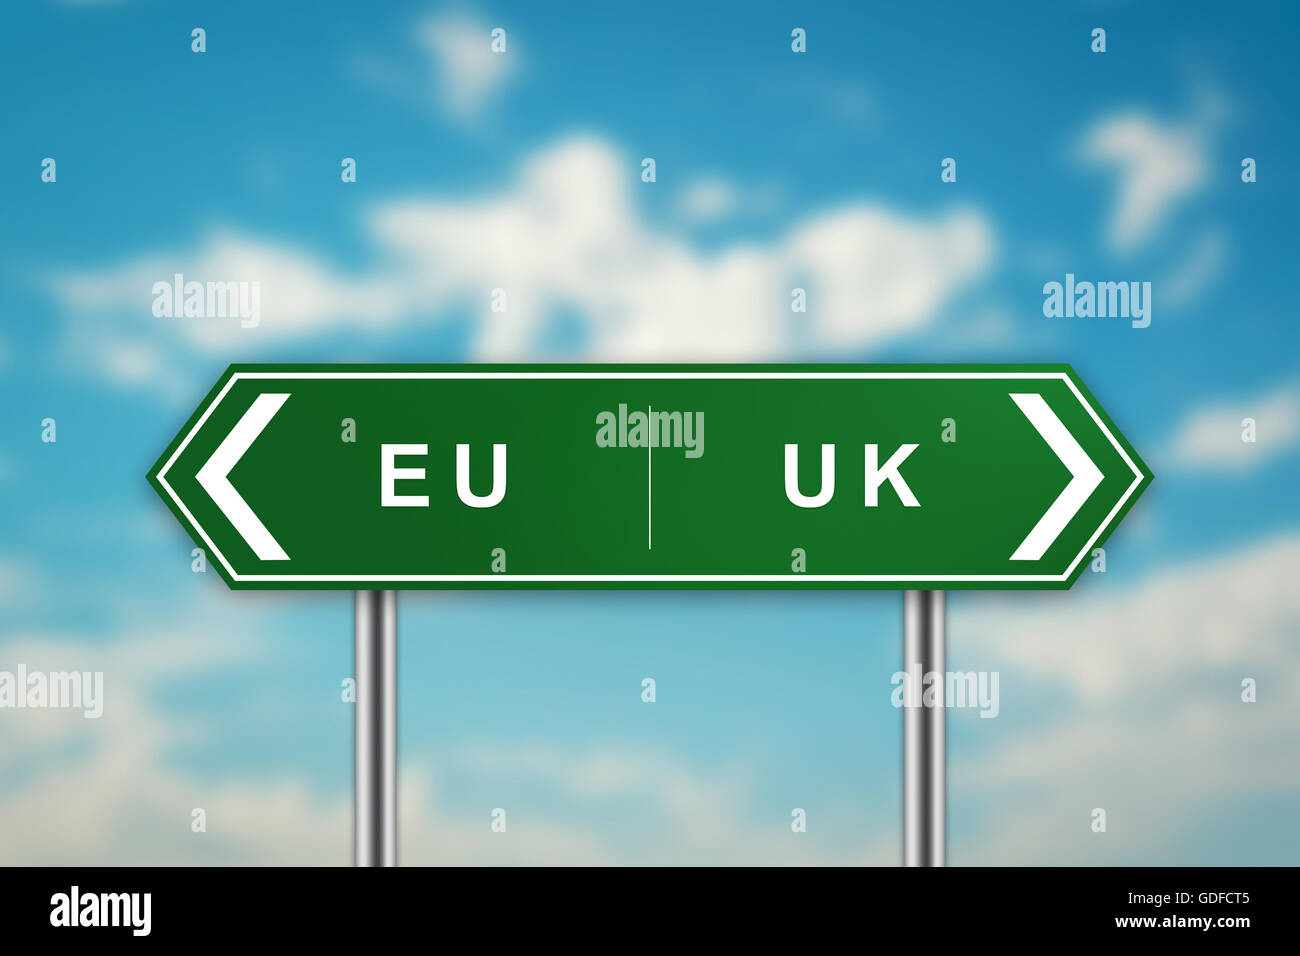 EURO and UK on green road sign with blurred blue sky, brexit or british exit concept Stock Photo